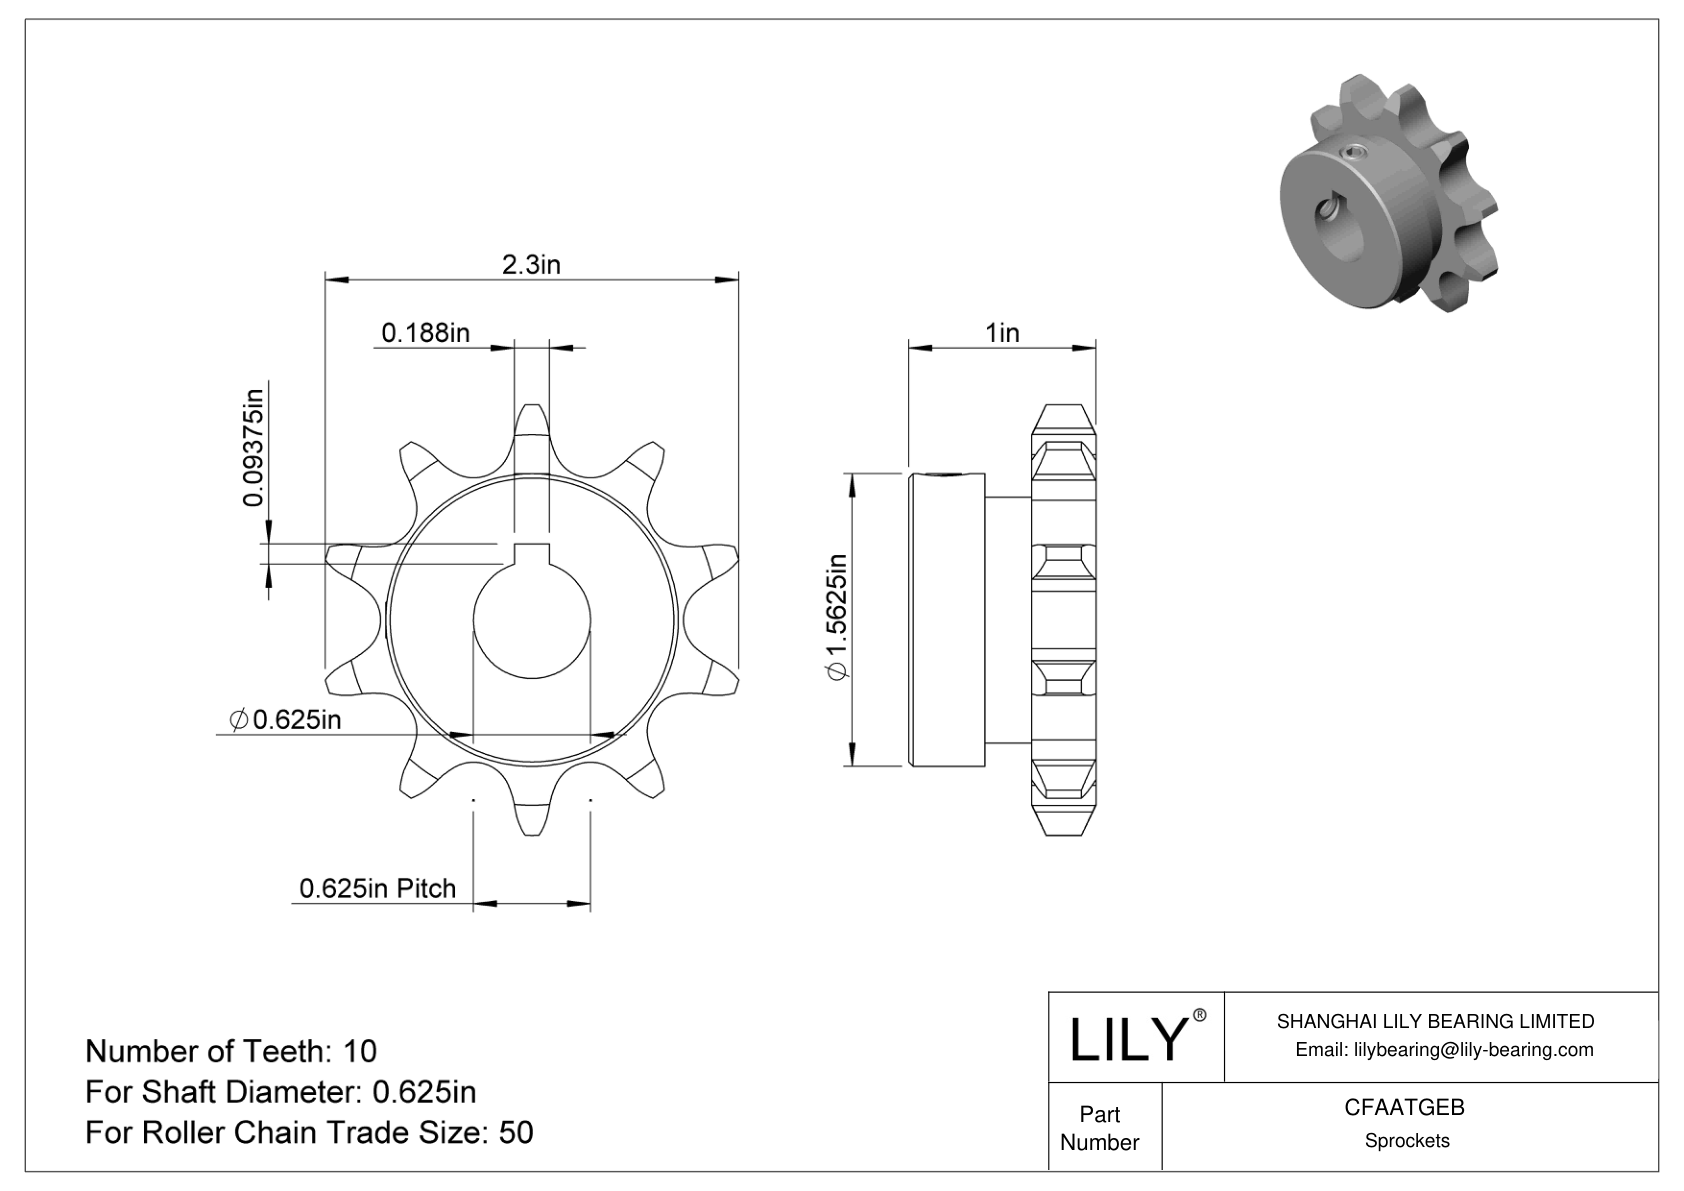 CFAATGEB Wear-Resistant Sprockets for ANSI Roller Chain cad drawing